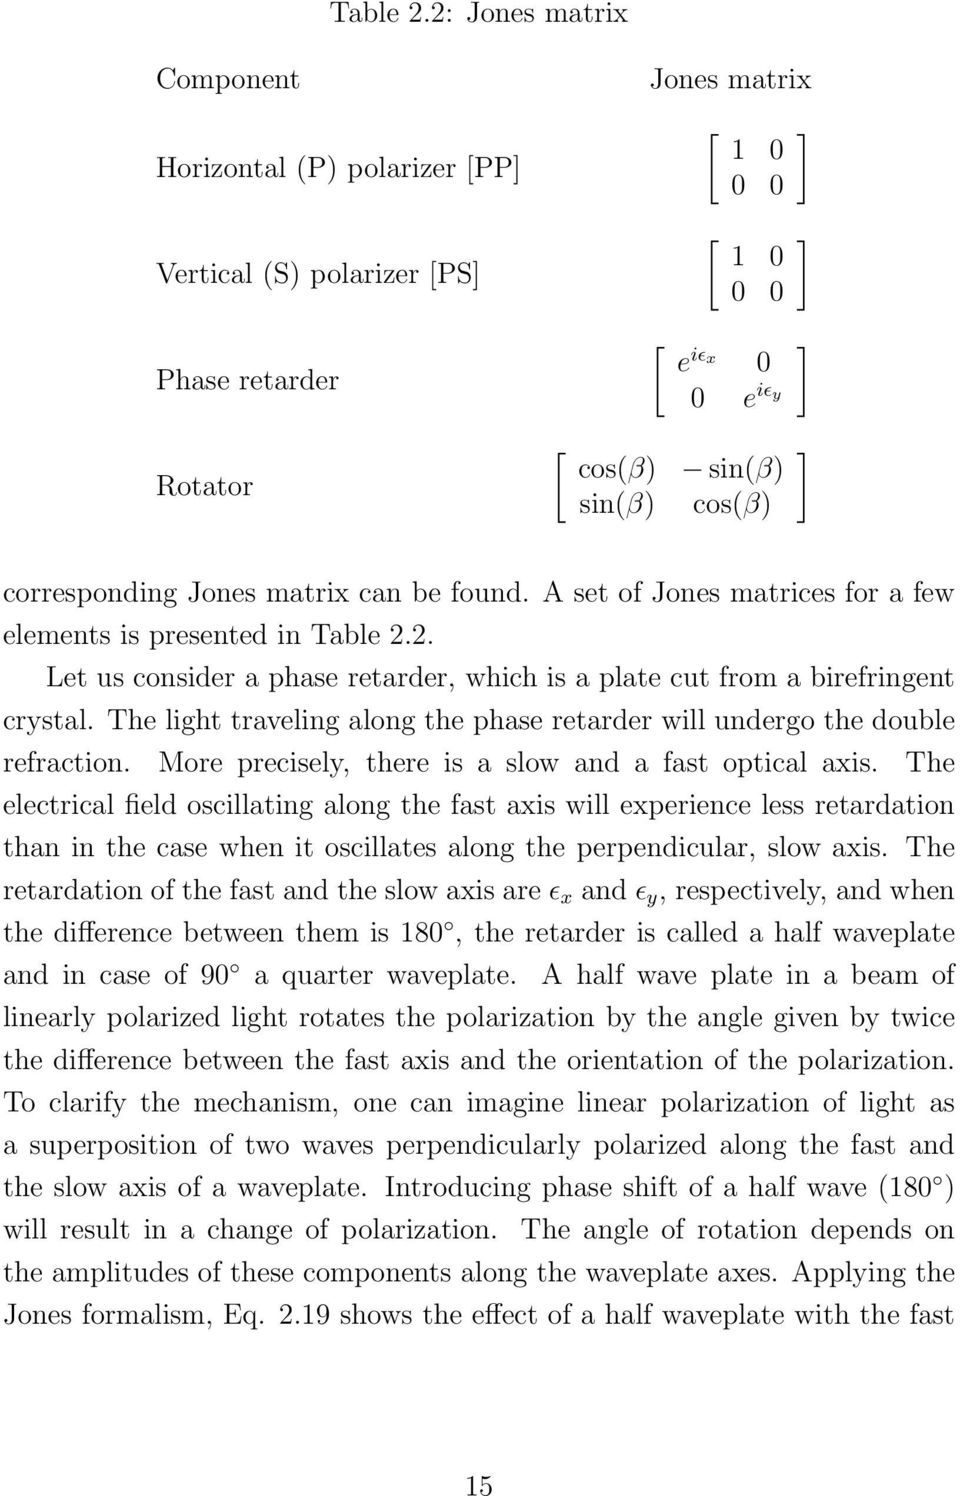 can be found. A set of Jones matrices for a few elements is presented in 2. Let us consider a phase retarder, which is a plate cut from a birefringent crstal.